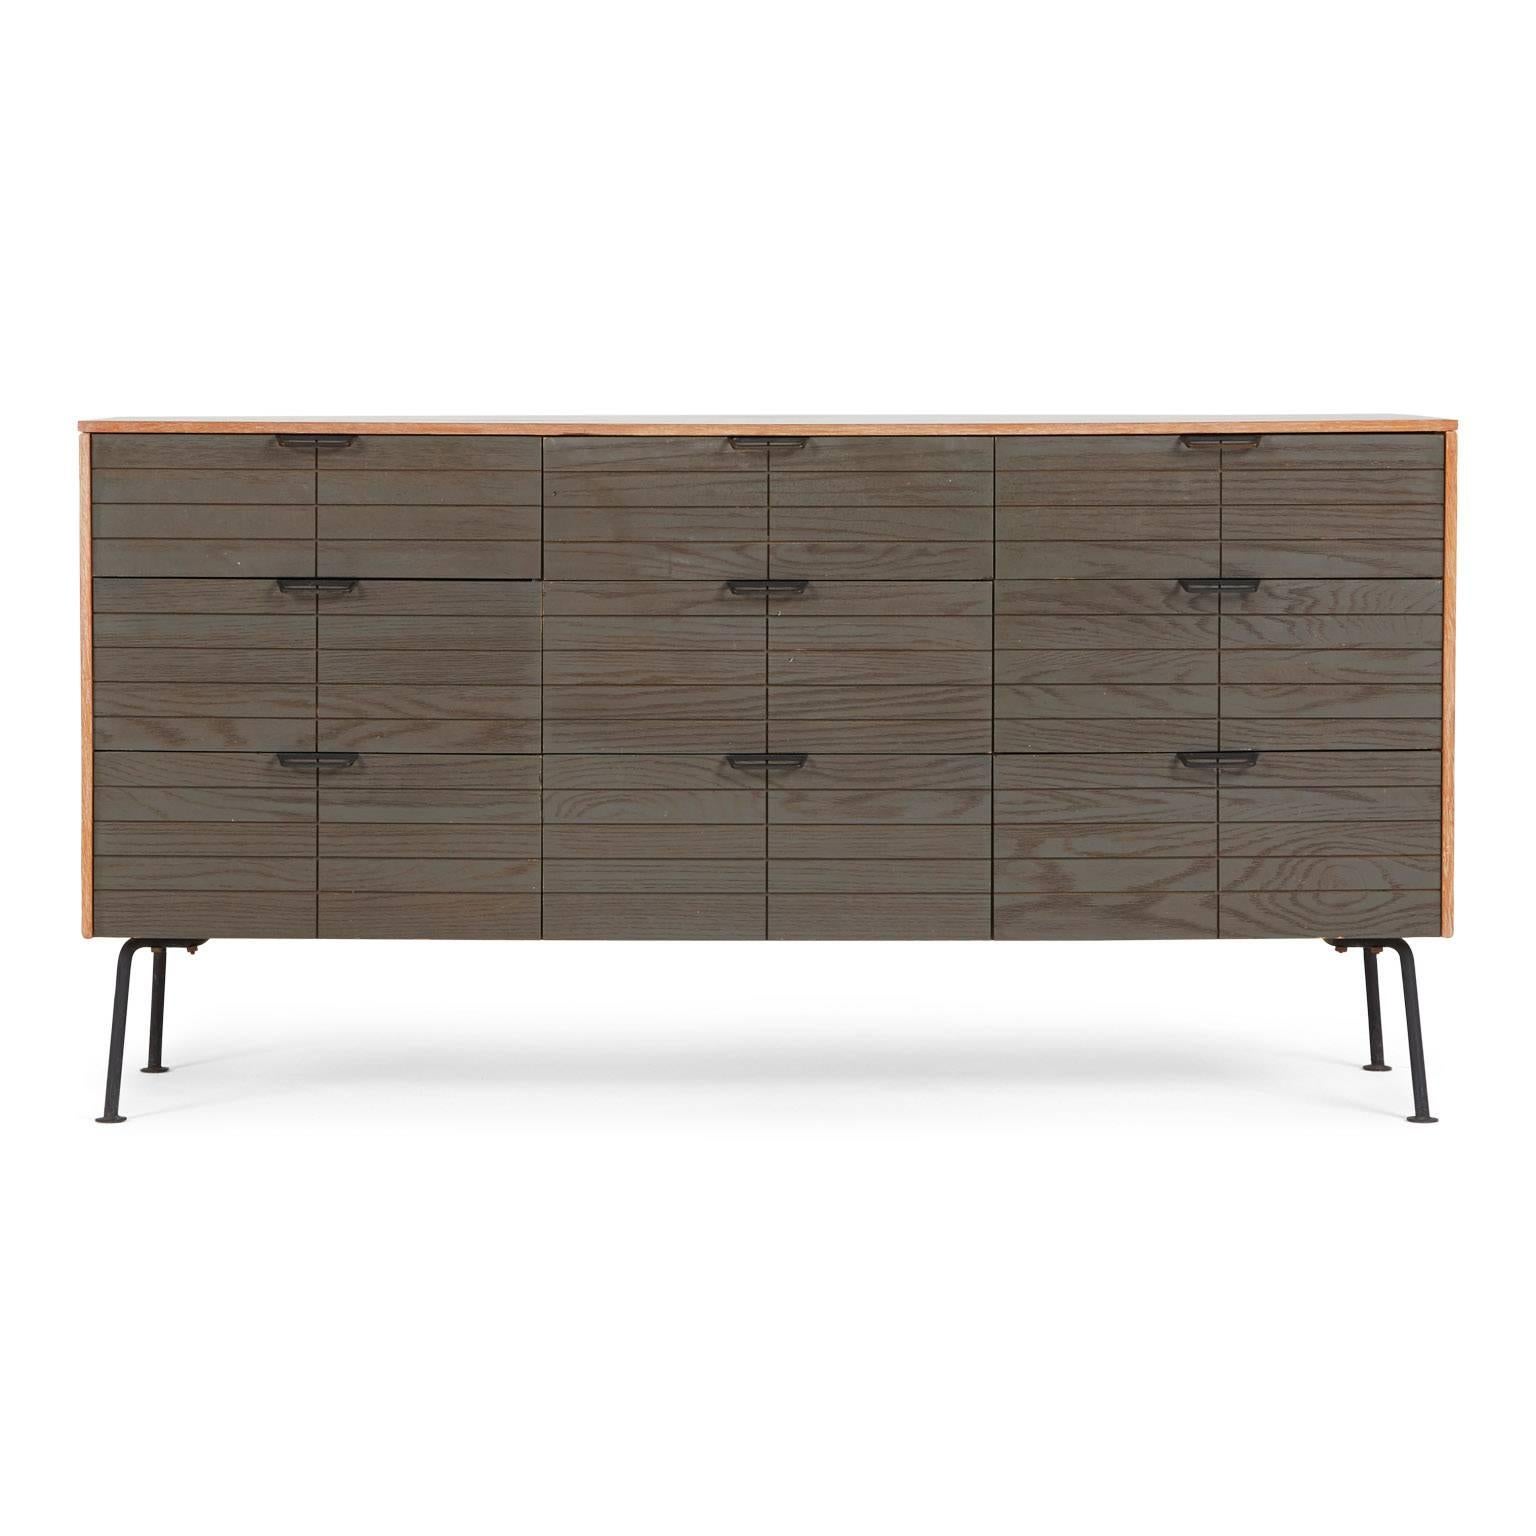 A desirable and rare five piece set by Raymond Loewy for Mengel, comprised of a drop-front secretary with three long drawers, a low nine-drawer dresser with a lift-out mirror, a single-drawer bedside table, a leatherette-upholstered stool and a